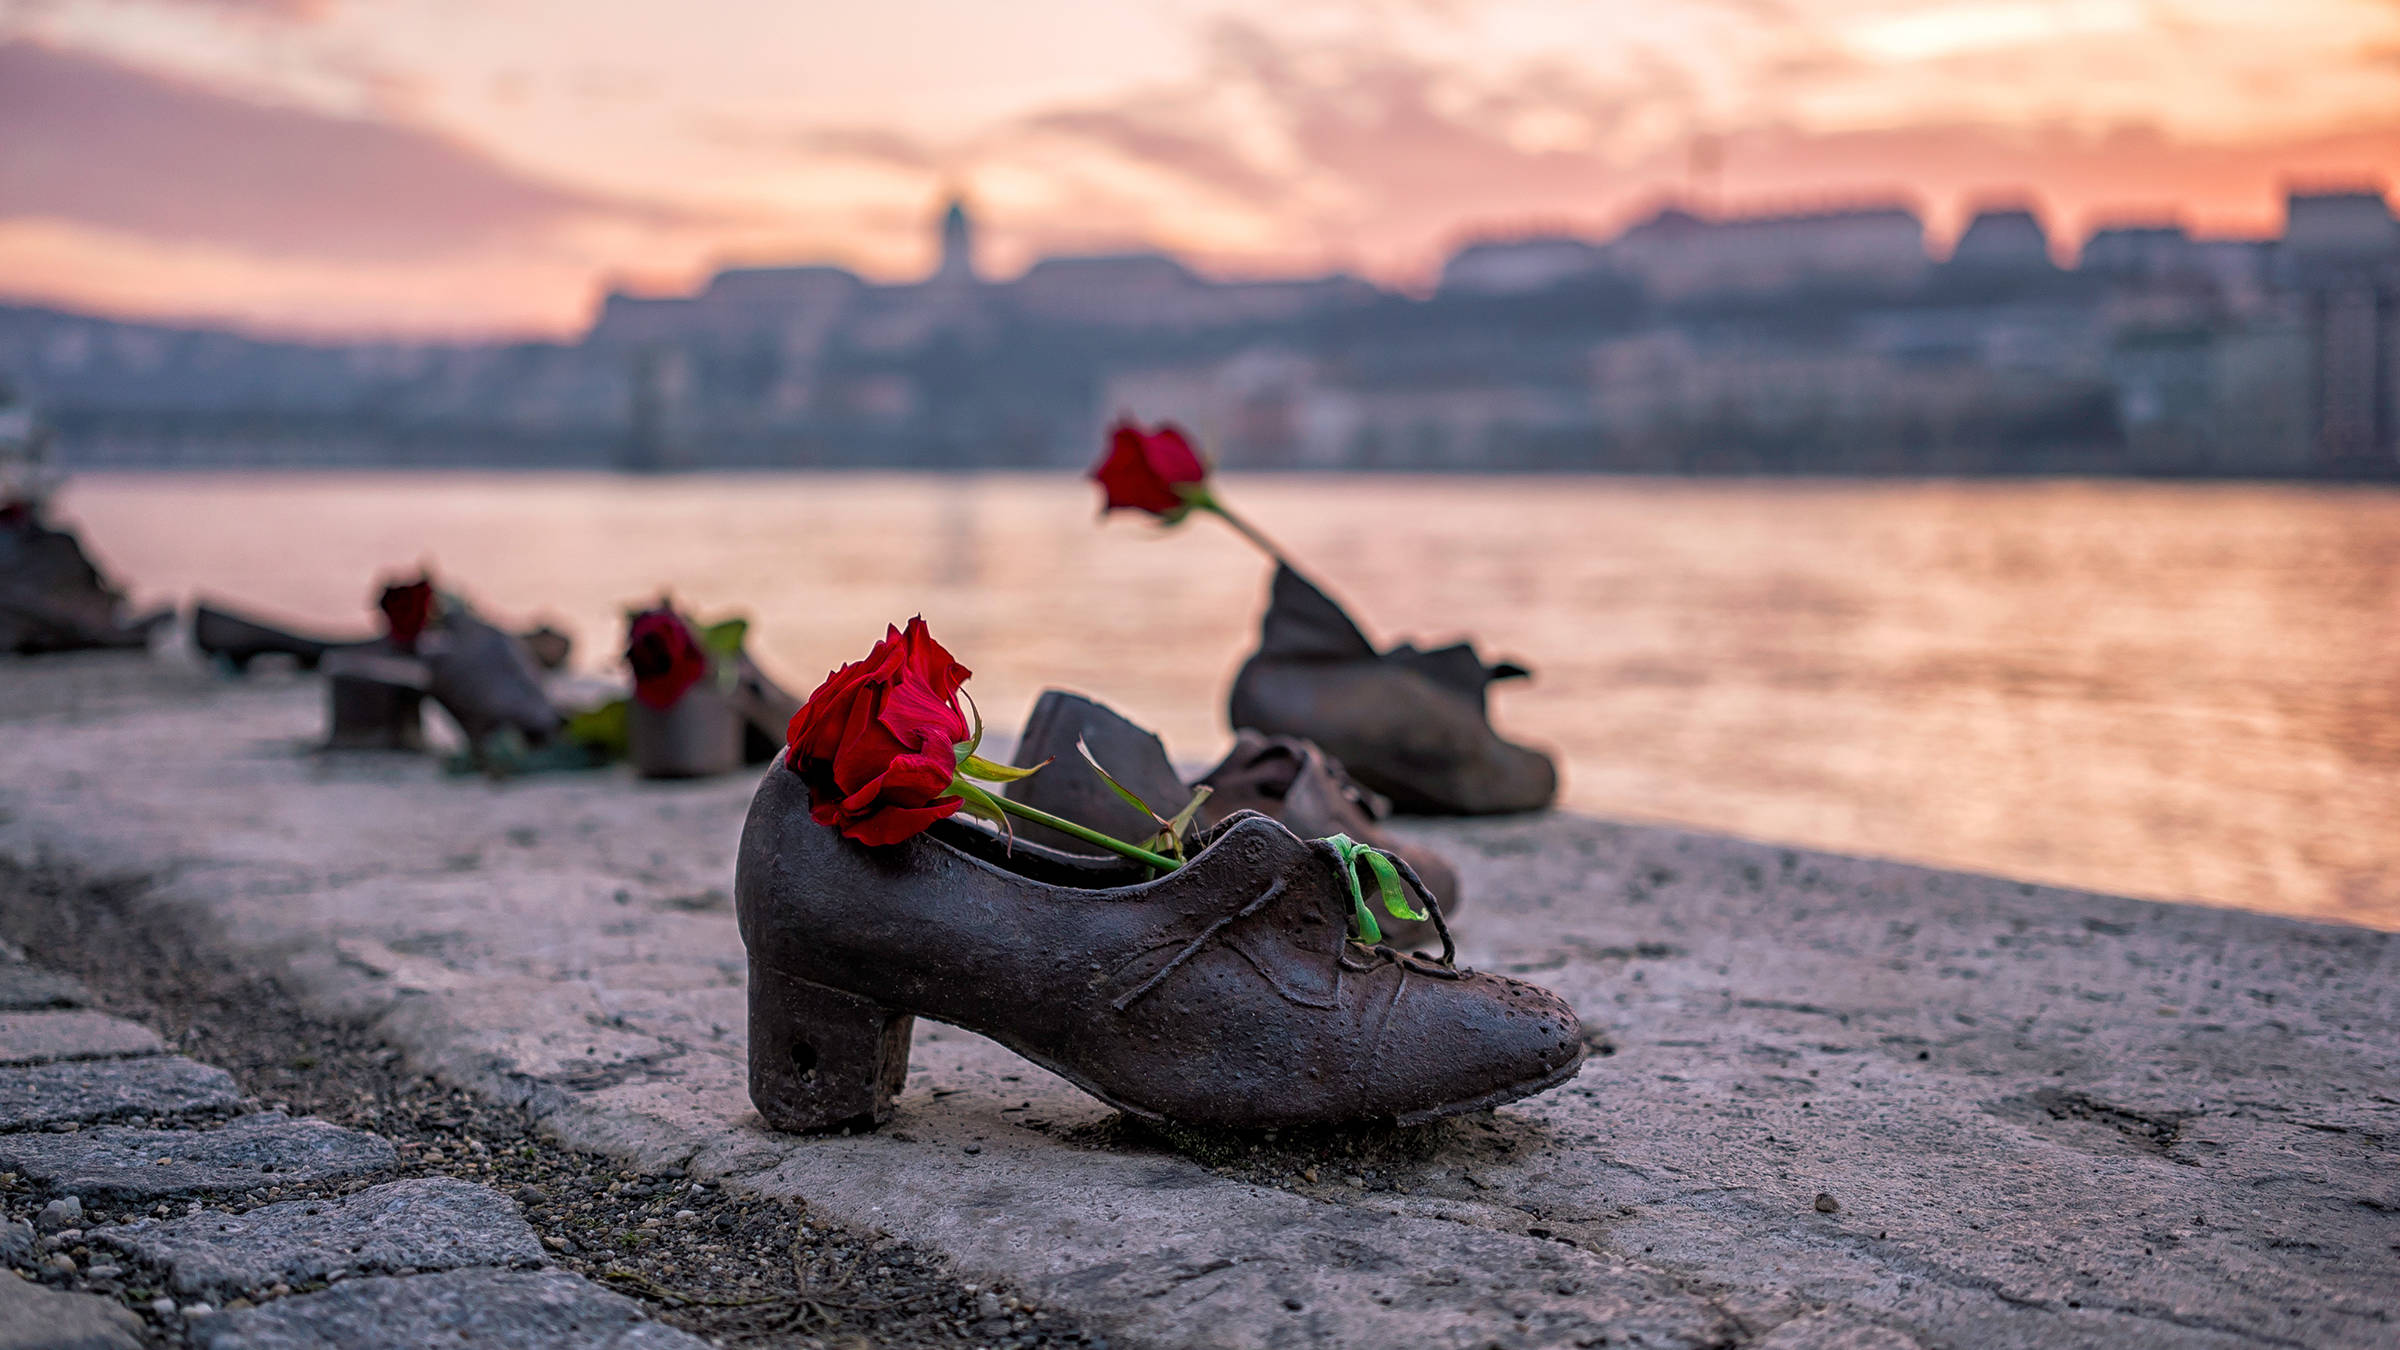 "Shoes on the Danube Bank" - H2 Hotel Budapest - Official website